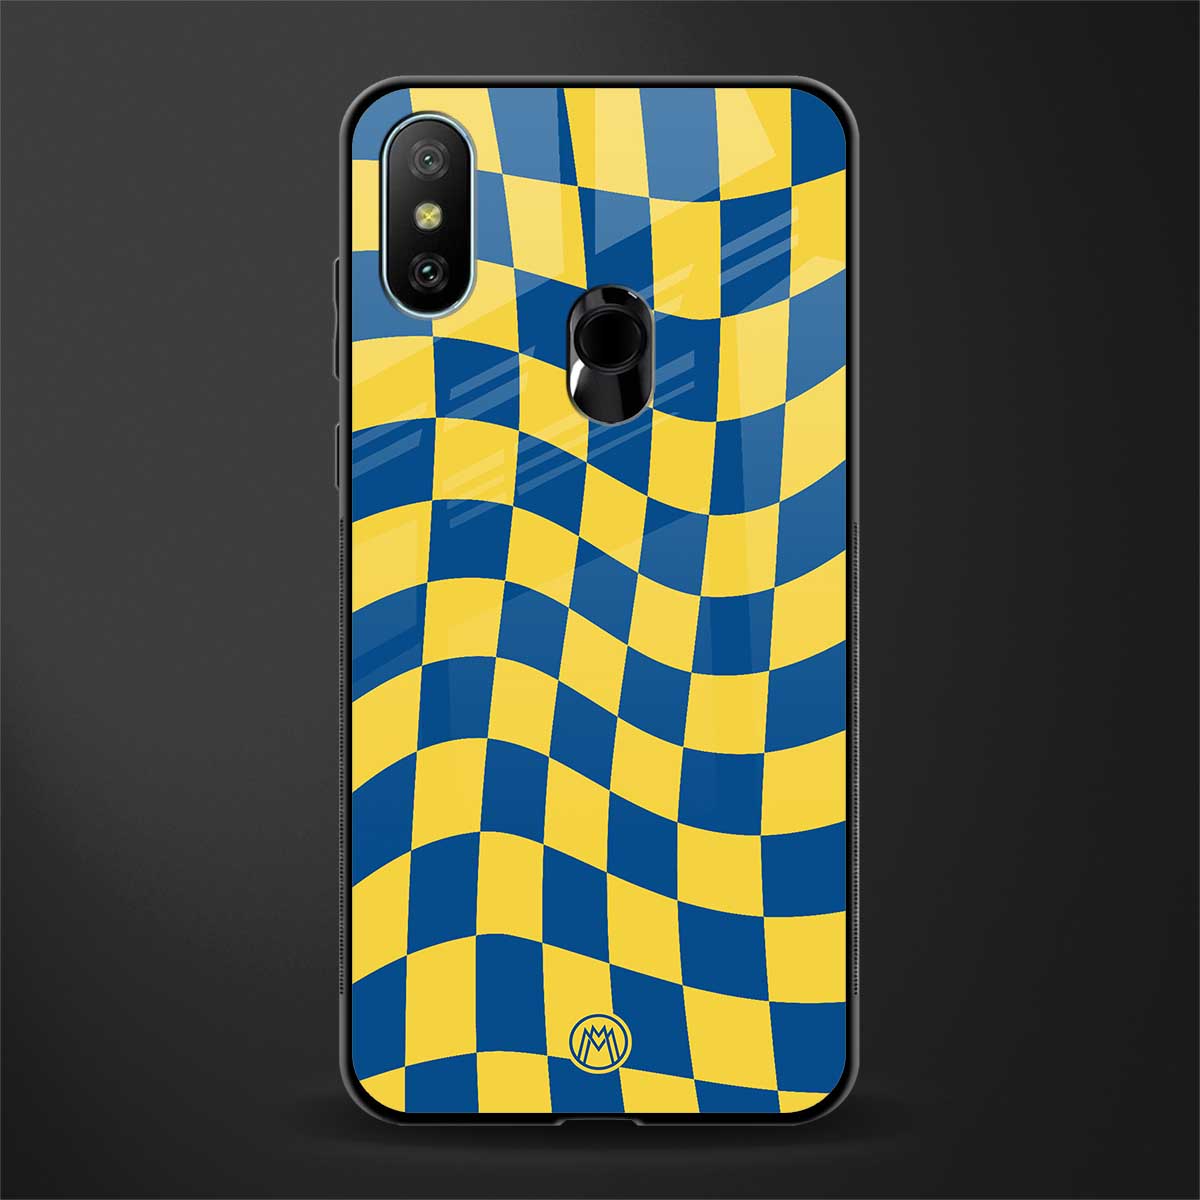 yellow blue trippy check pattern glass case for redmi 6 pro image